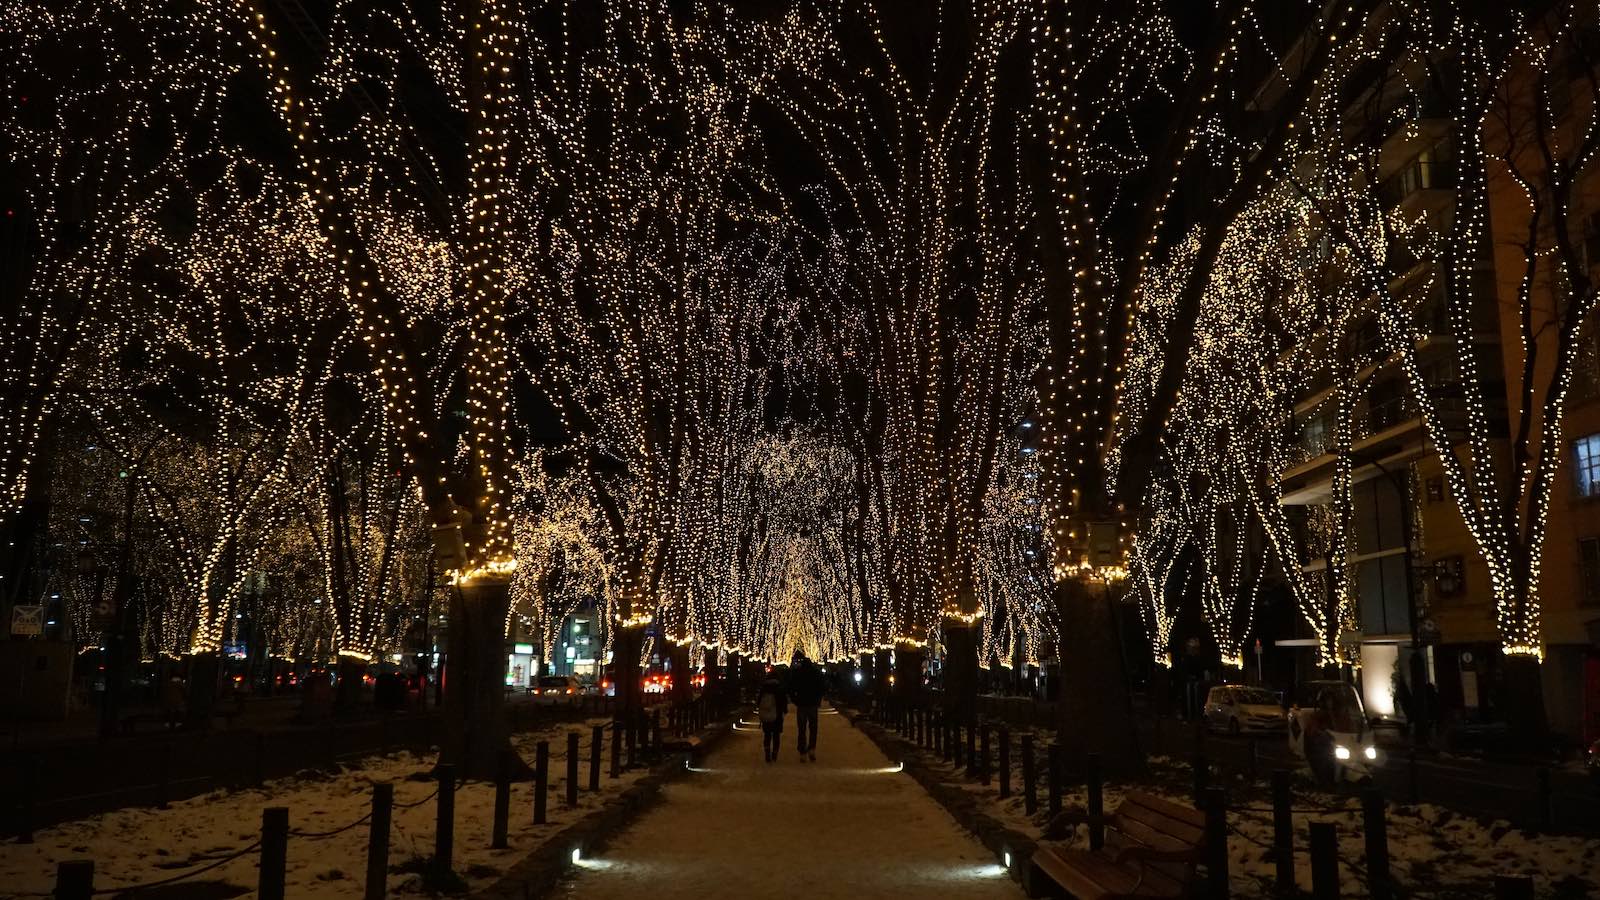 It was gorgeous walking through the tunnel of light created by the trees, especially with the snow on the ground softening the scene. It felt like something out of a romance movie. I spent a long time slowly walking up and down the street taking photos and taking it all in.